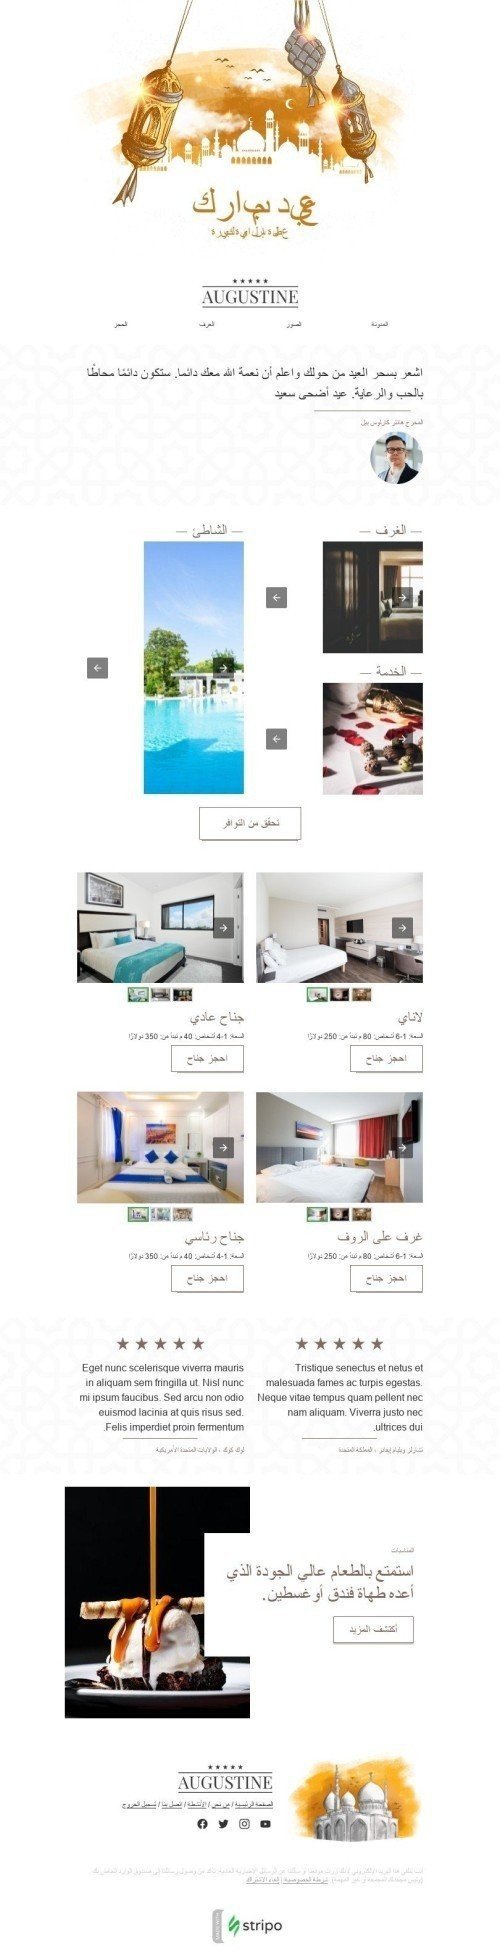 Kurban Bayrami Email Template «Augustine» for Hotels industry mobile view